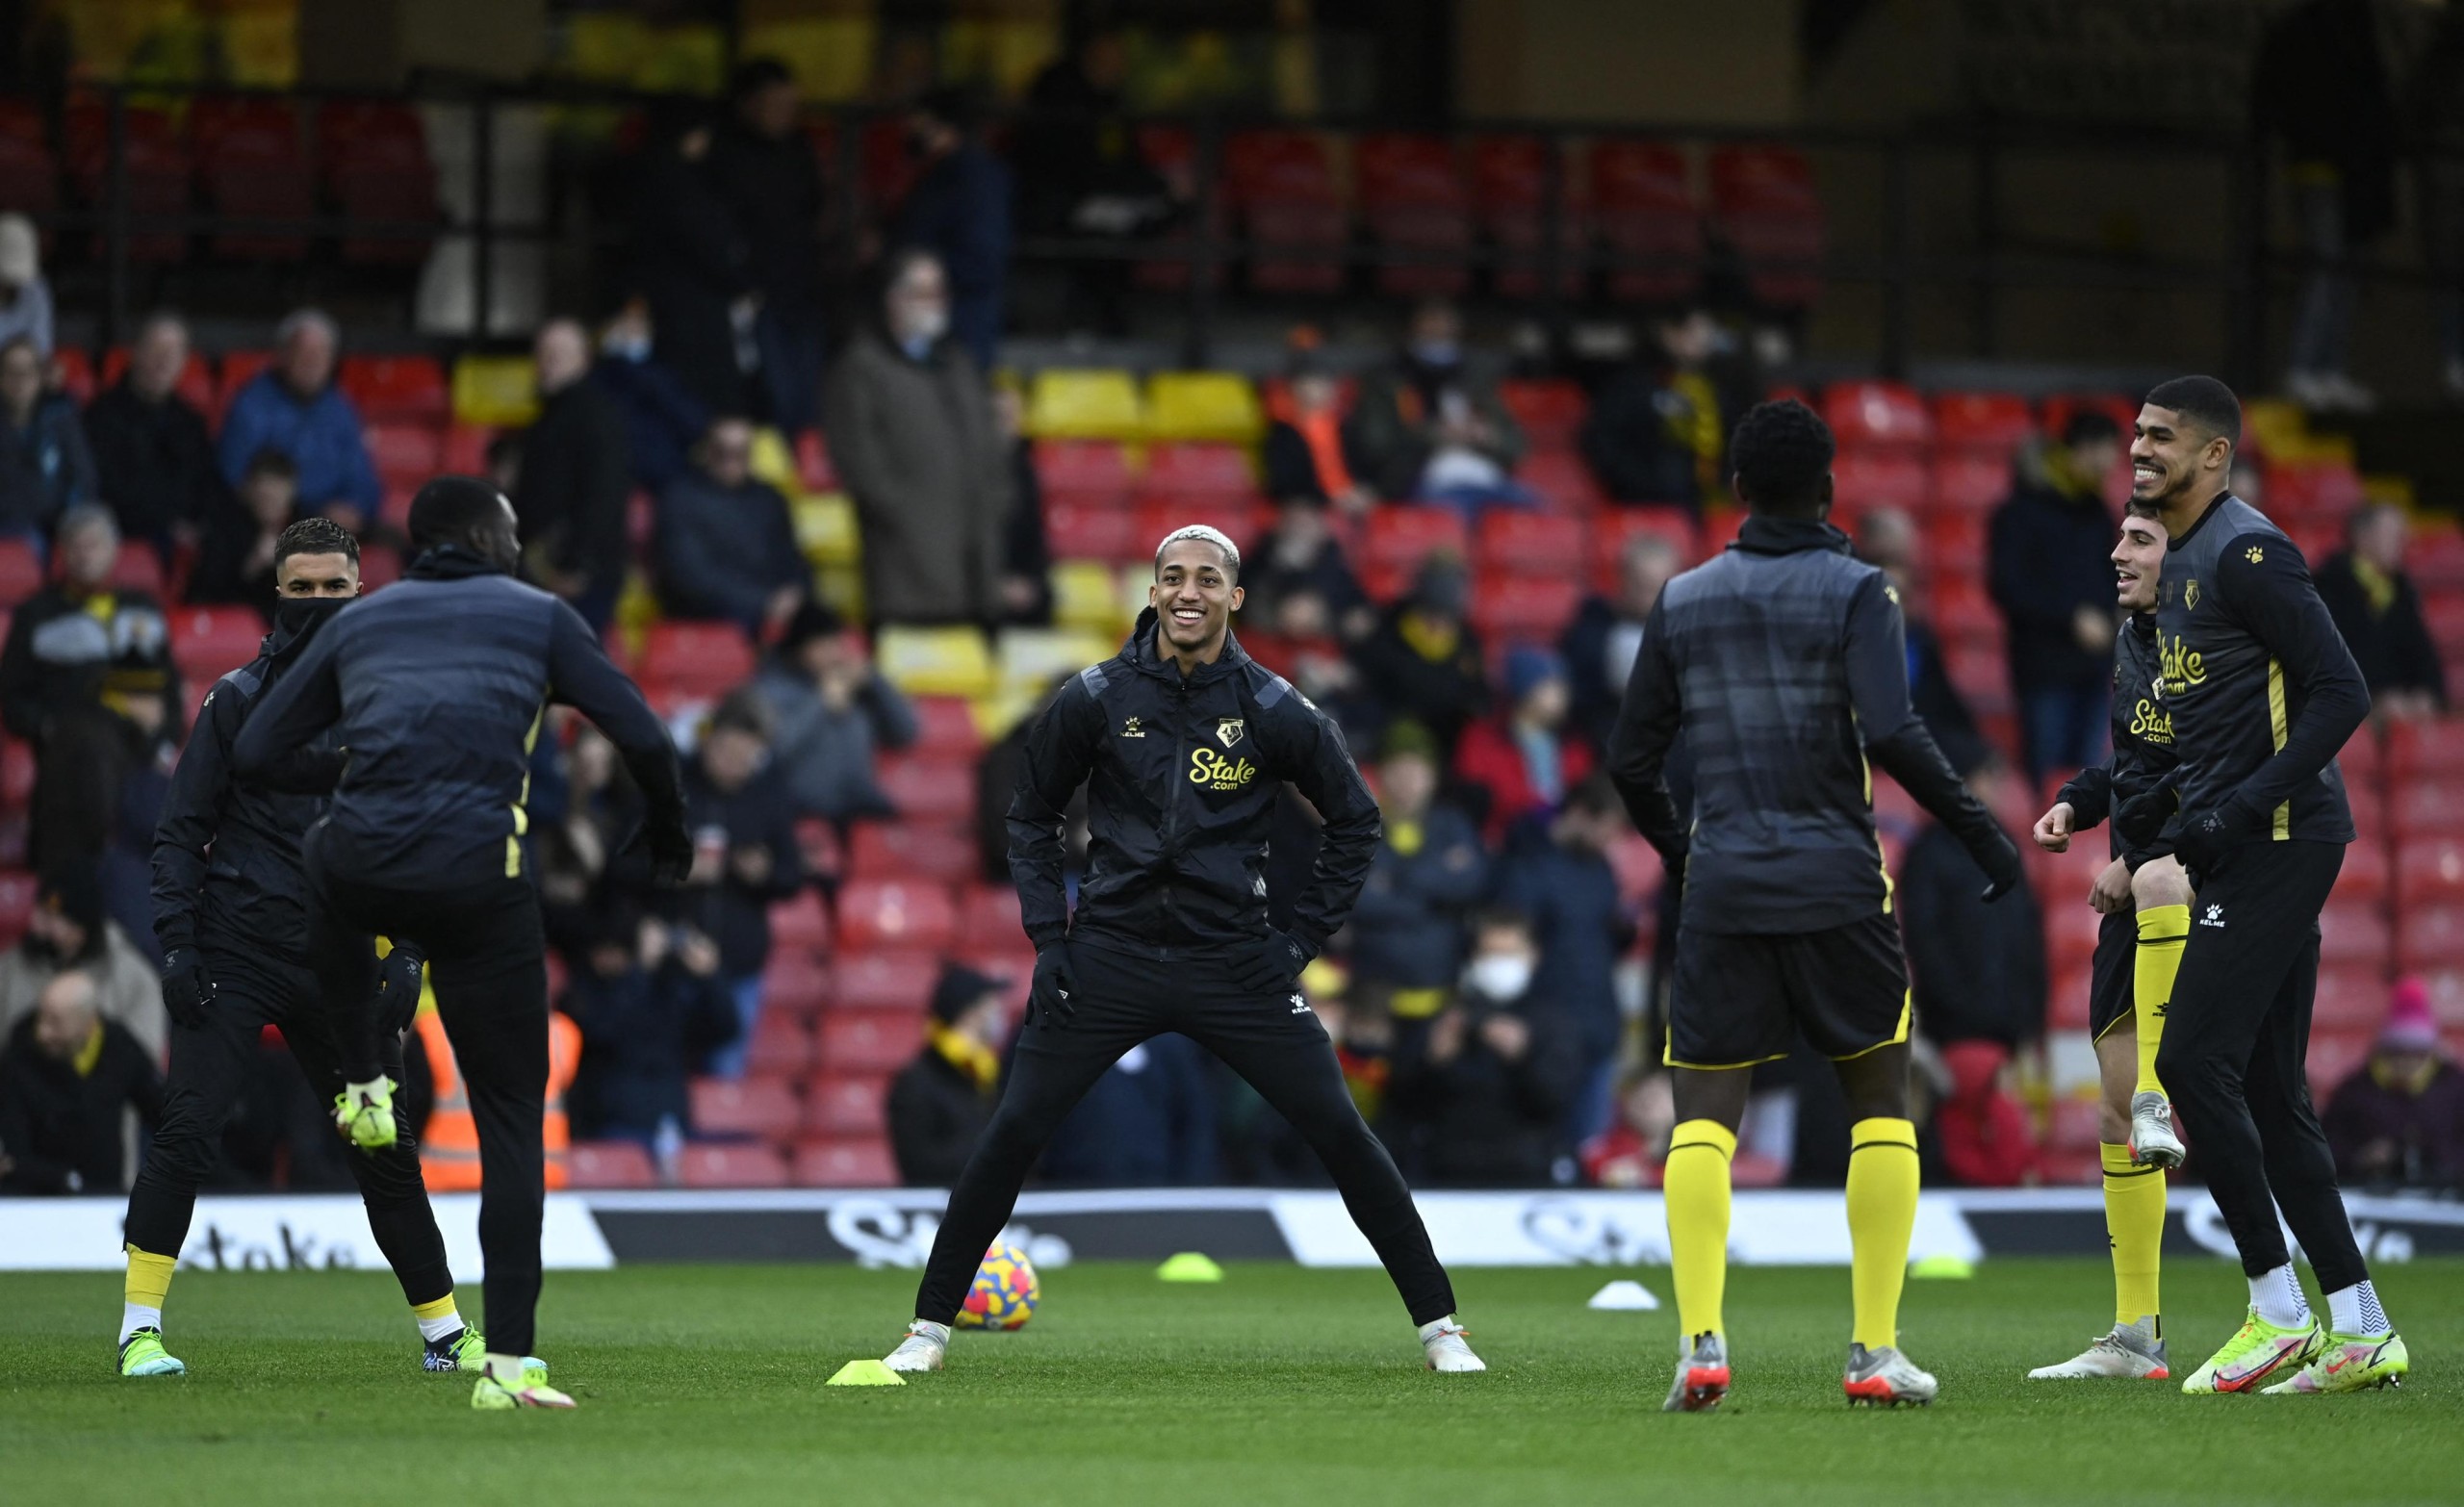 Soccer Football - Premier League - Watford v West Ham United - Vicarage Road, Watford, Britain - December 28, 2021 Watford's Joao Pedro during the warm up before the match REUTERS/Tony Obrien EDITORIAL USE ONLY. No use with unauthorized audio, video, data, fixture lists, club/league logos or 'live' services. Online in-match use limited to 75 images, no video emulation. No use in betting, games or single club /league/player publications.  Please contact your account representative for further details. Photo: TONY OBRIEN/REUTERS